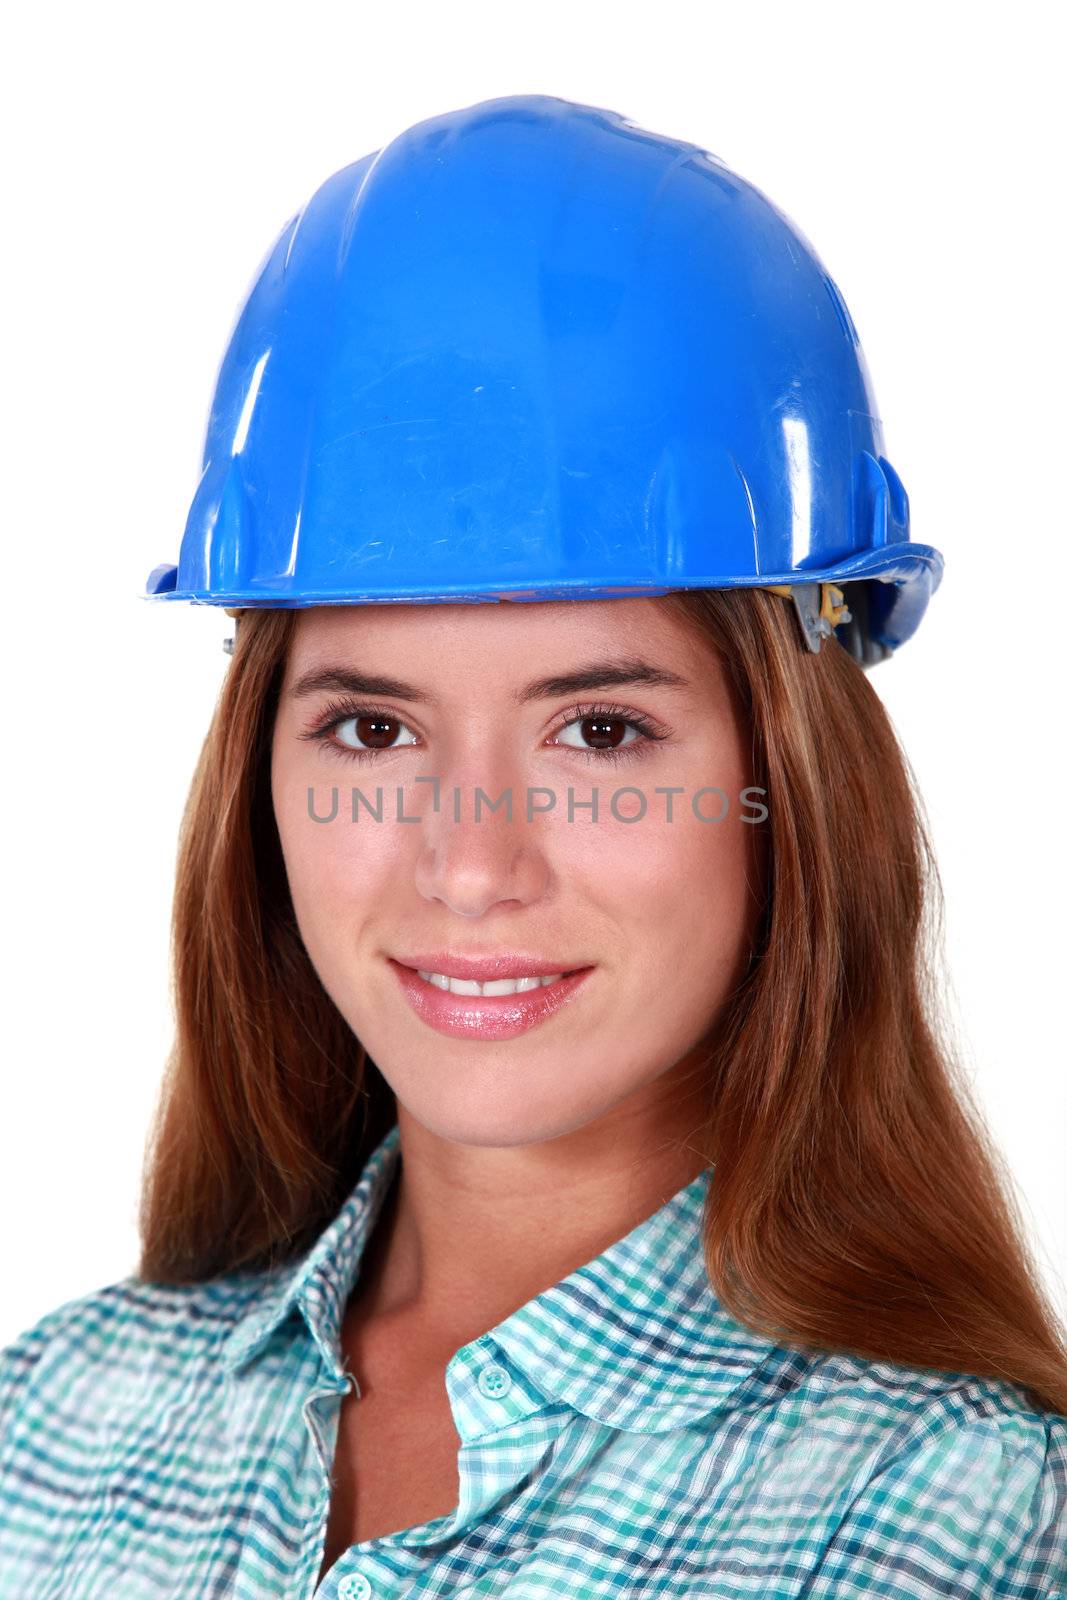 Closeup of a woman in a hardhat by phovoir